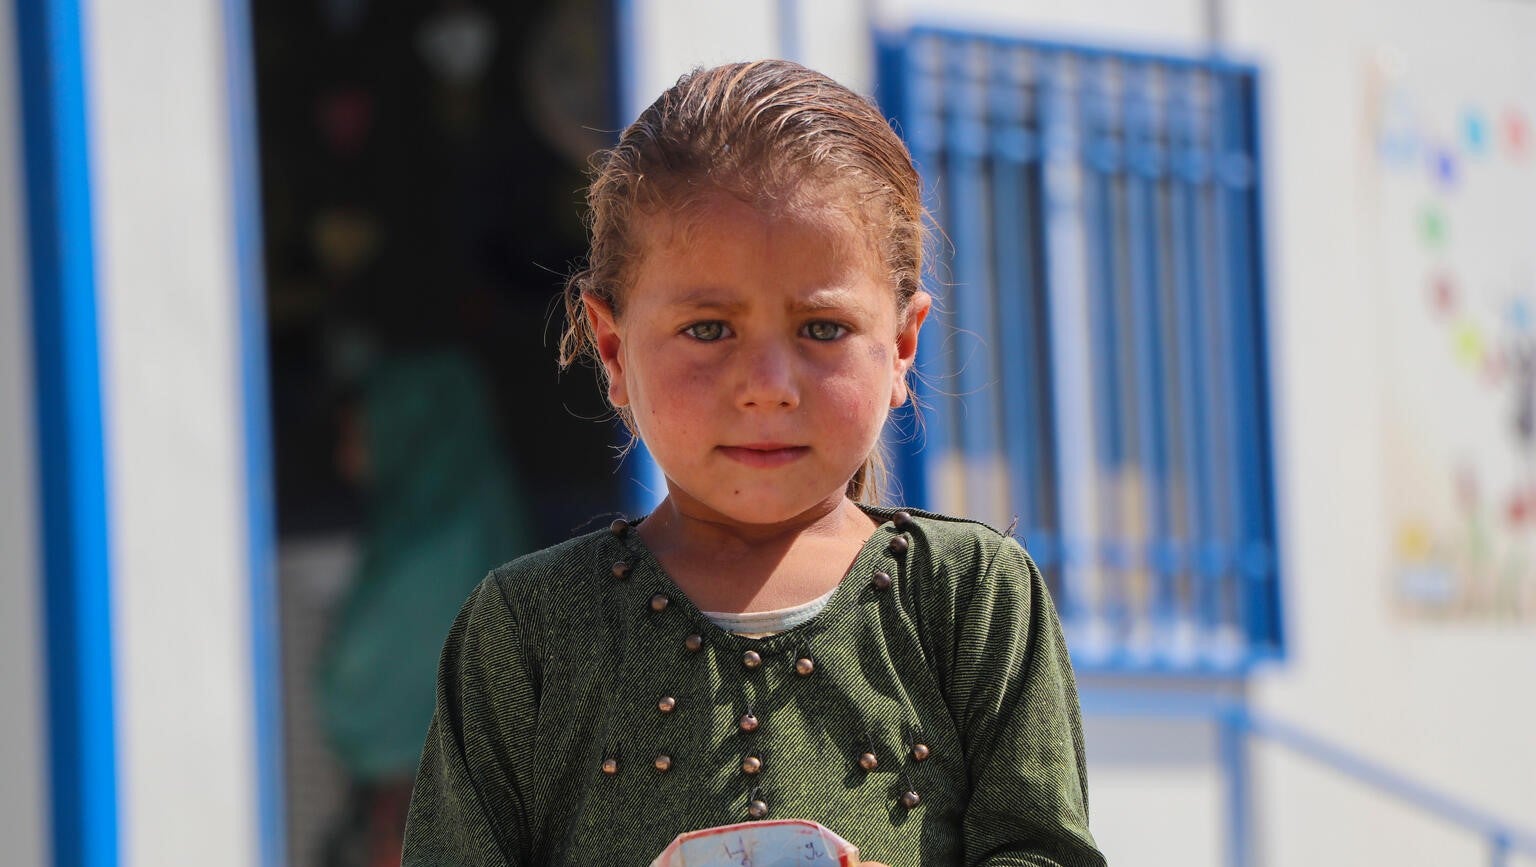  A little girl impacted by the series of earthquakes that hit Syria & Türkiye.